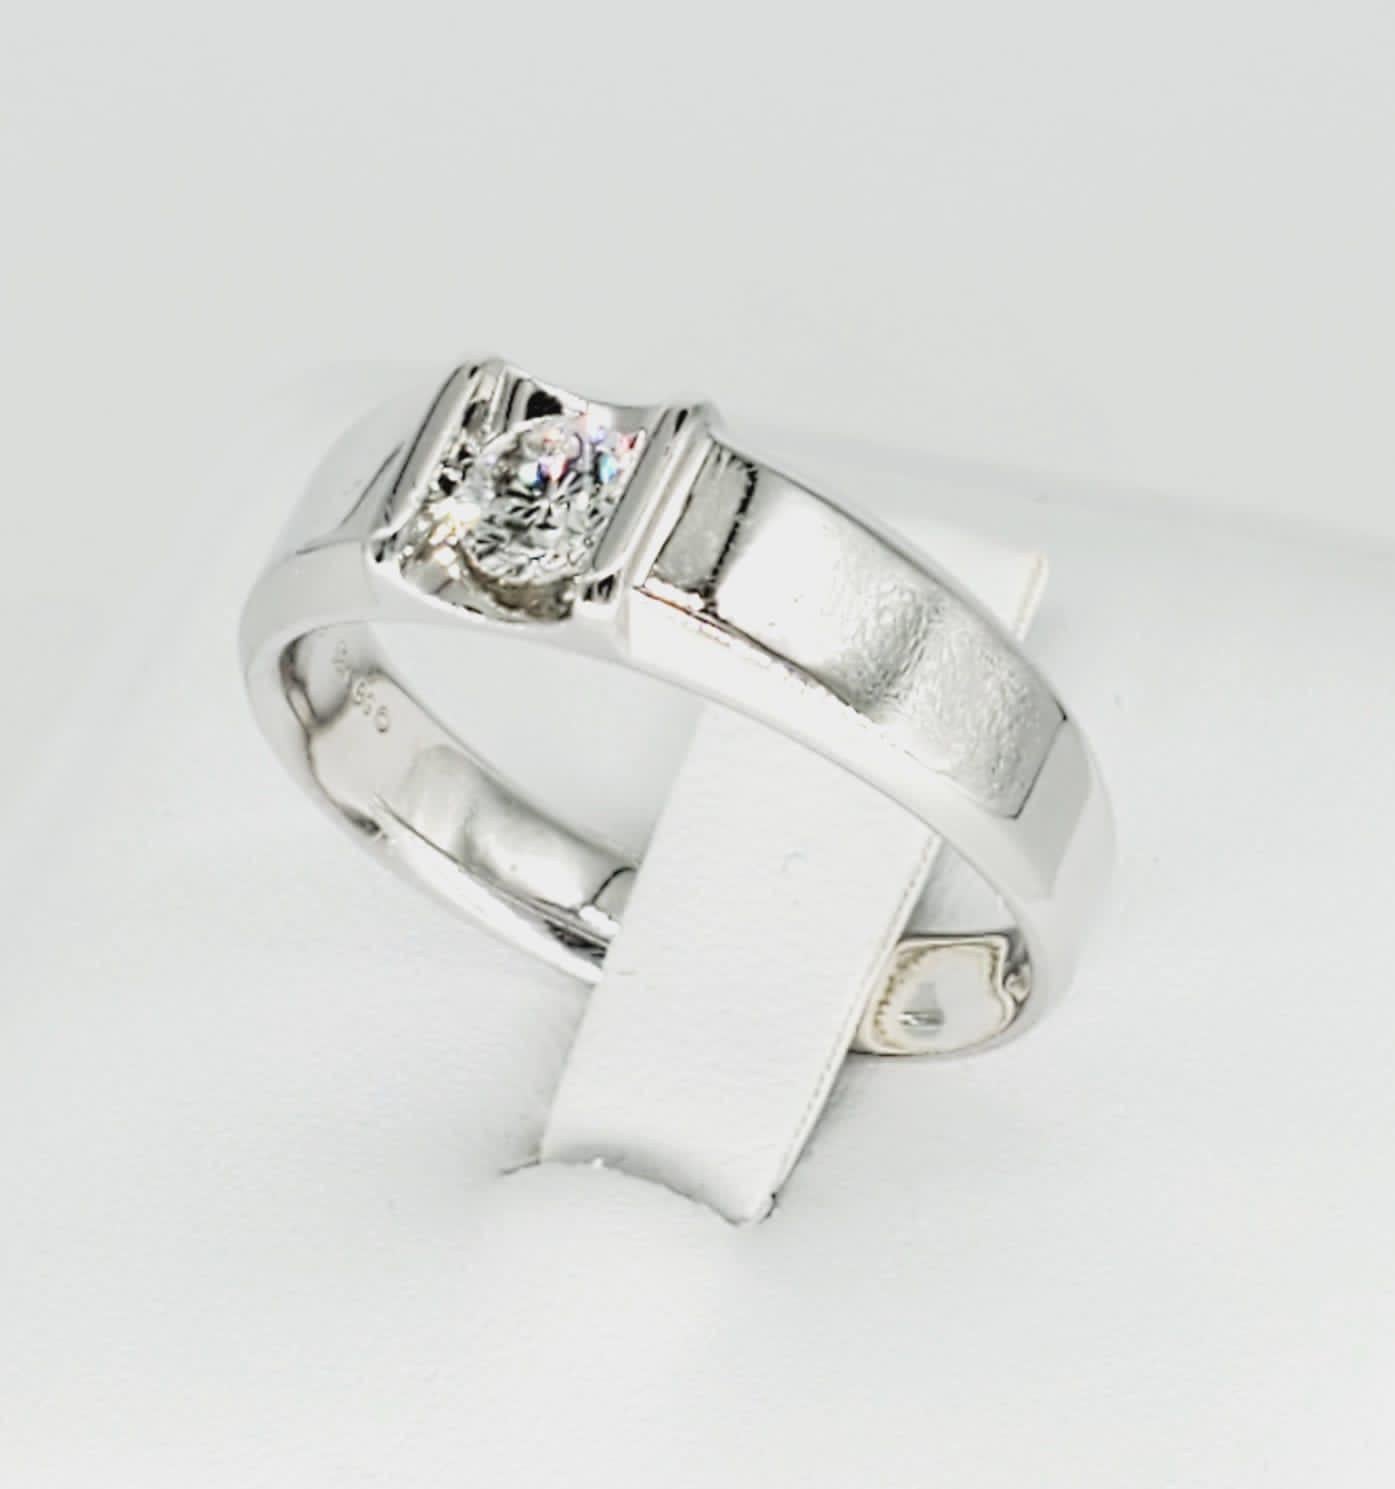 Men’s 18k White Gold 0.45 Carat Diamond Center Ring. Stunning design with a beautiful round diamond in the center. Clarity of the diamond is F/VS
The ring is a size 10 and weights 8.3 grams.